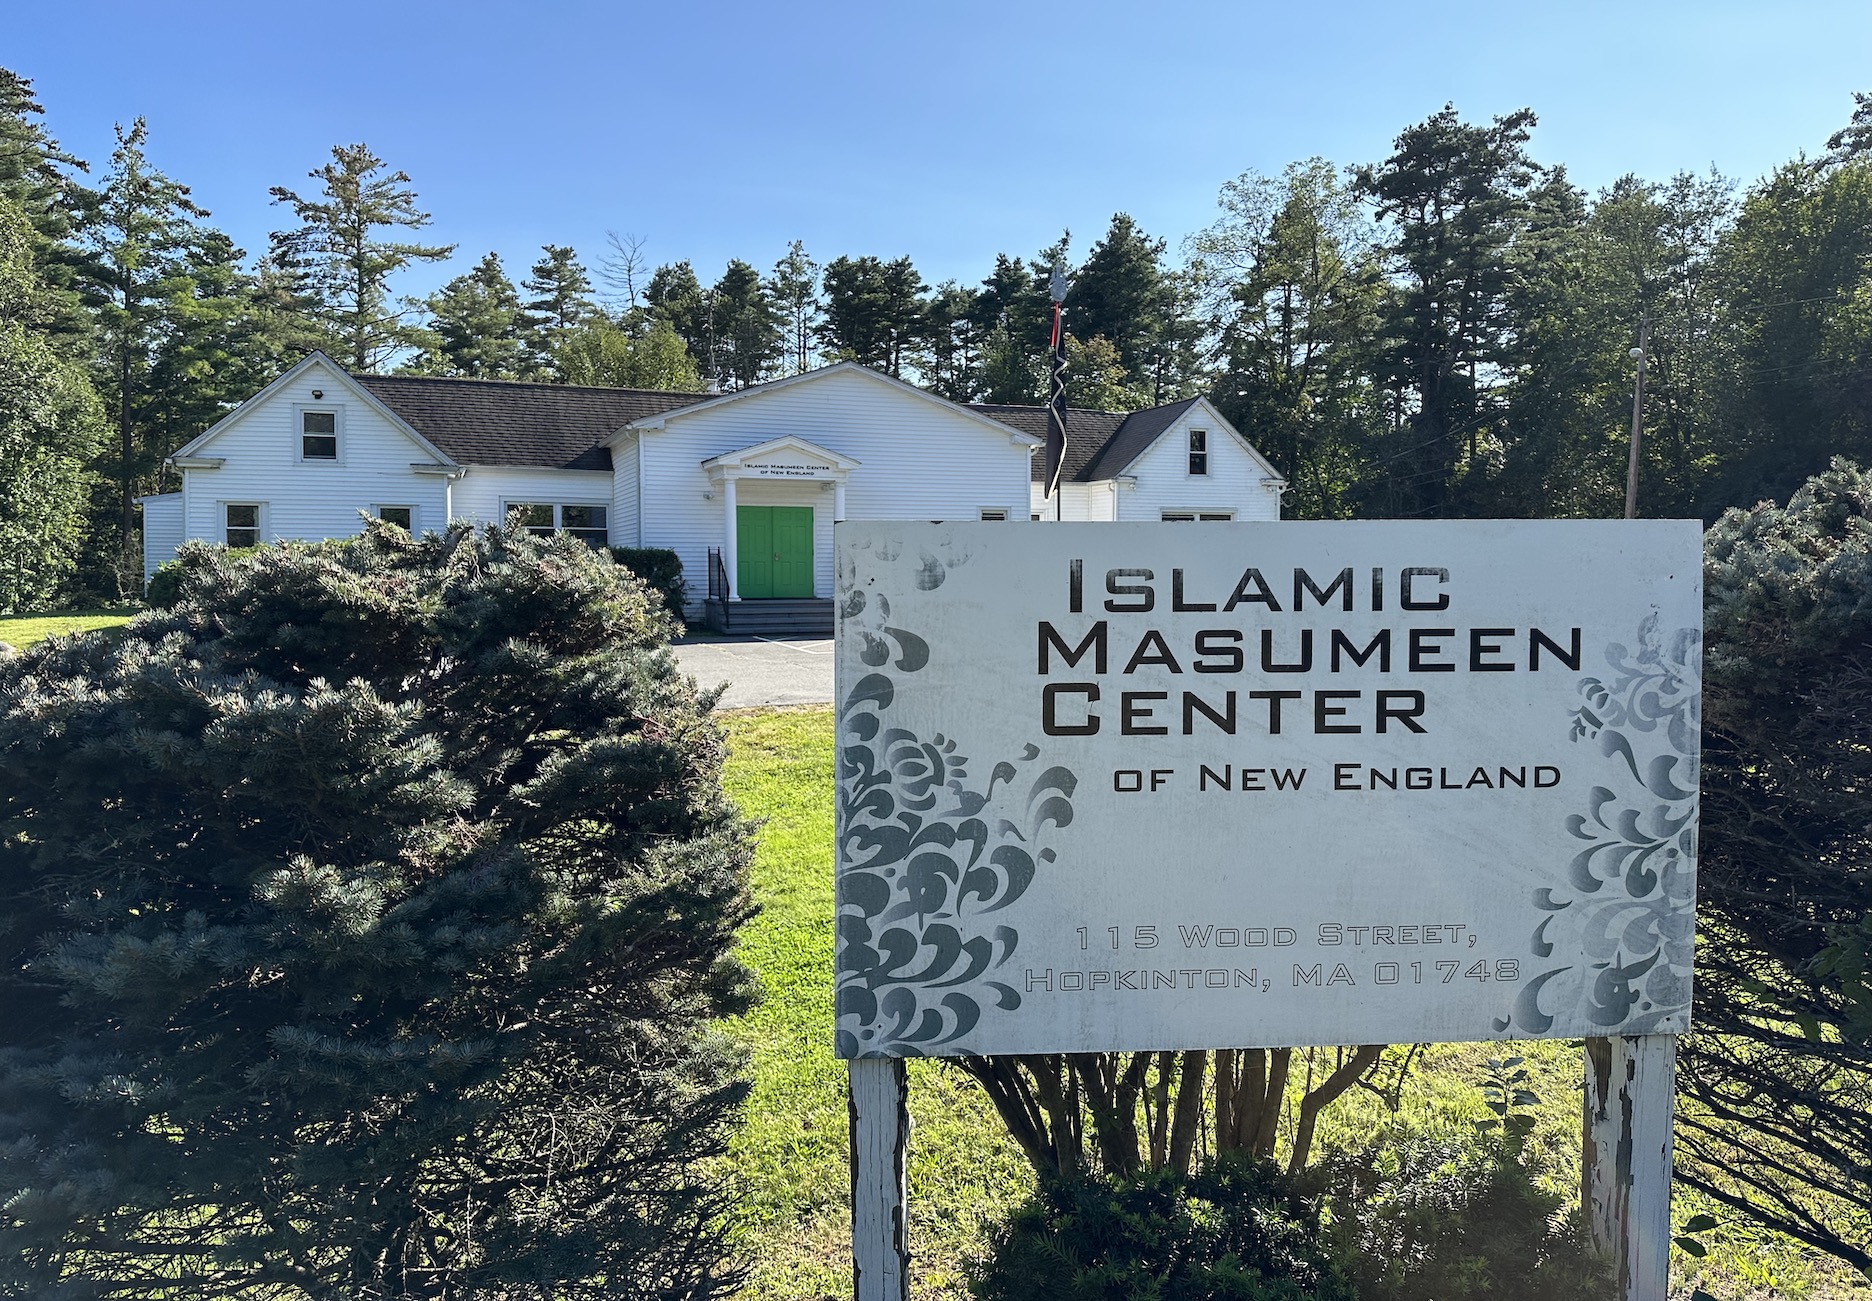 Hopkinton’s Masumeen Islamic Center expresses concern for situation in Middle East